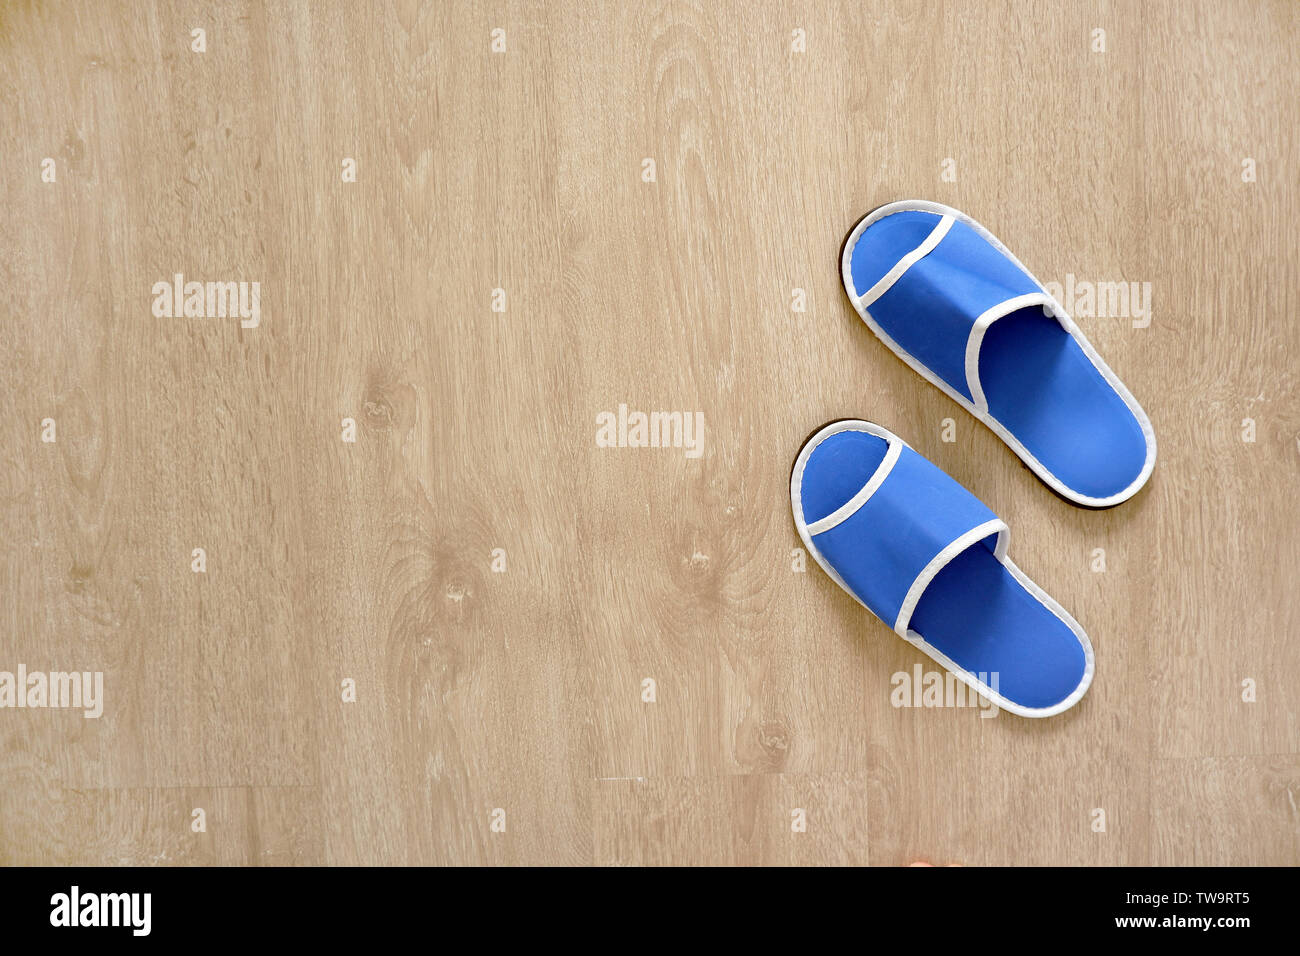 blue house slippers